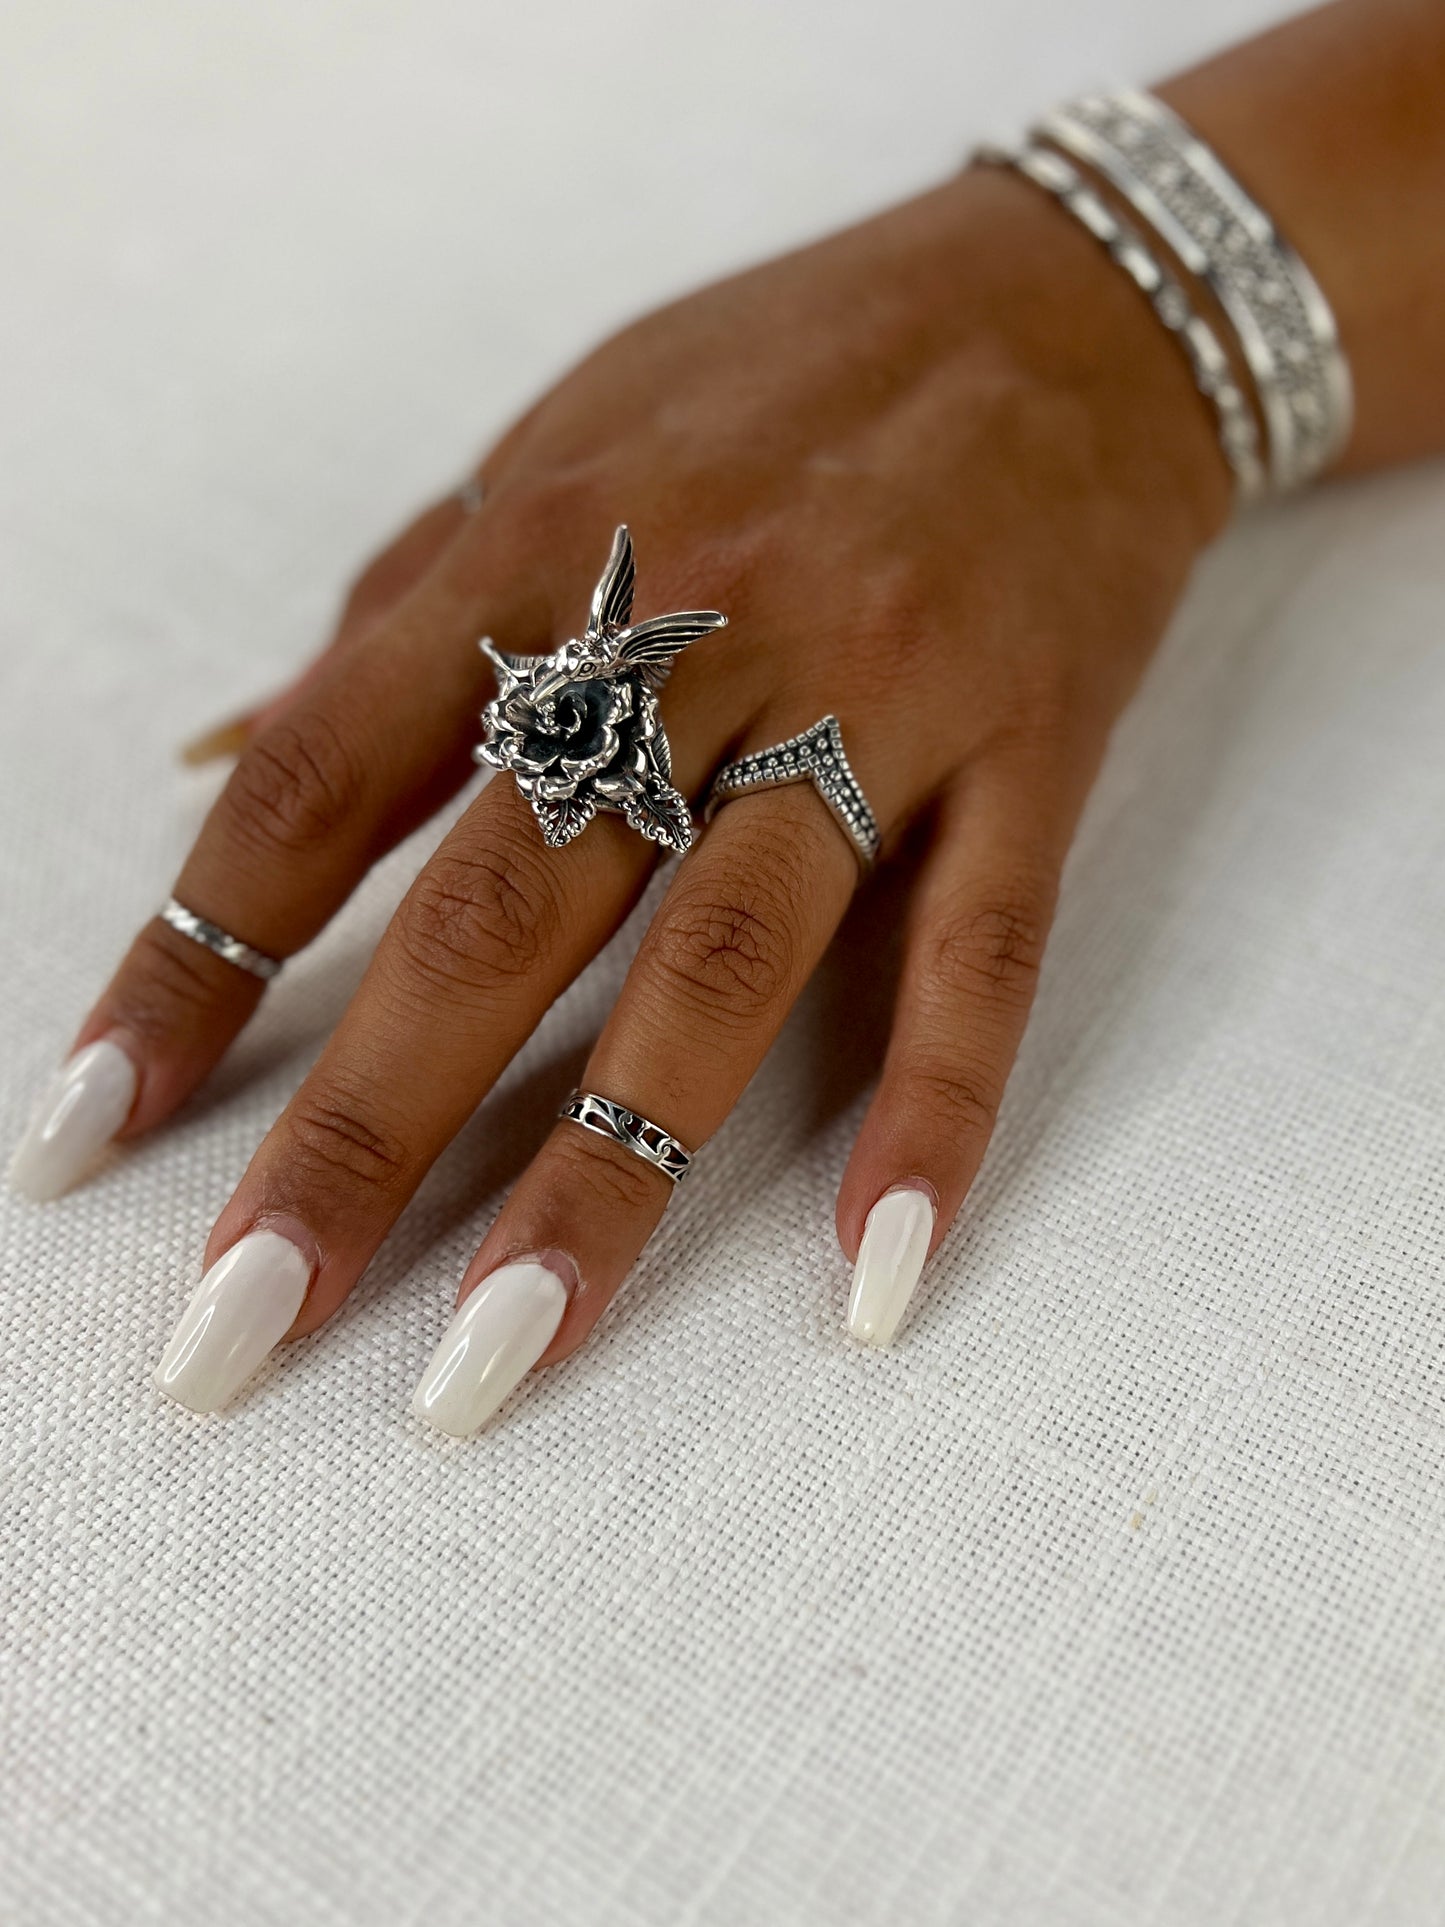 A woman's hand adorned with Super Silver's 4mm Filigree Squared Band, showcasing white nails and a silver ring.